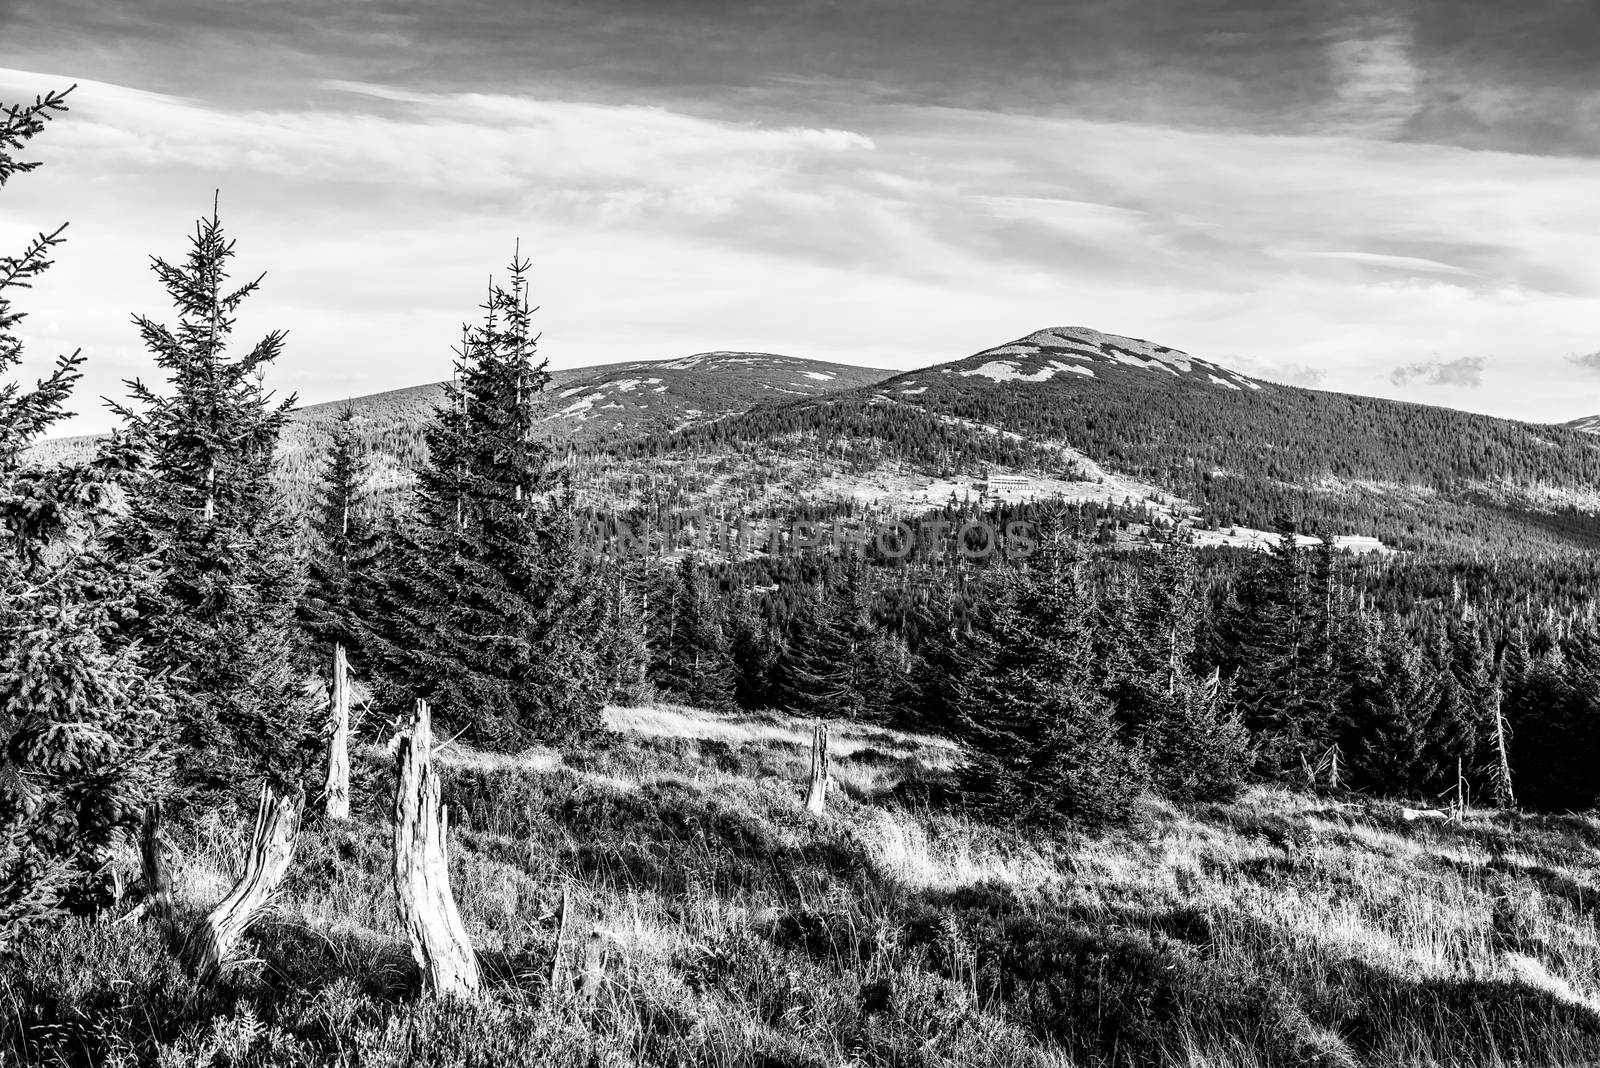 Green forest landscape with Maly Sisak Mountain and mountain huts, Giant Mountains, Krkonose, Czech Republic. Black and white image.